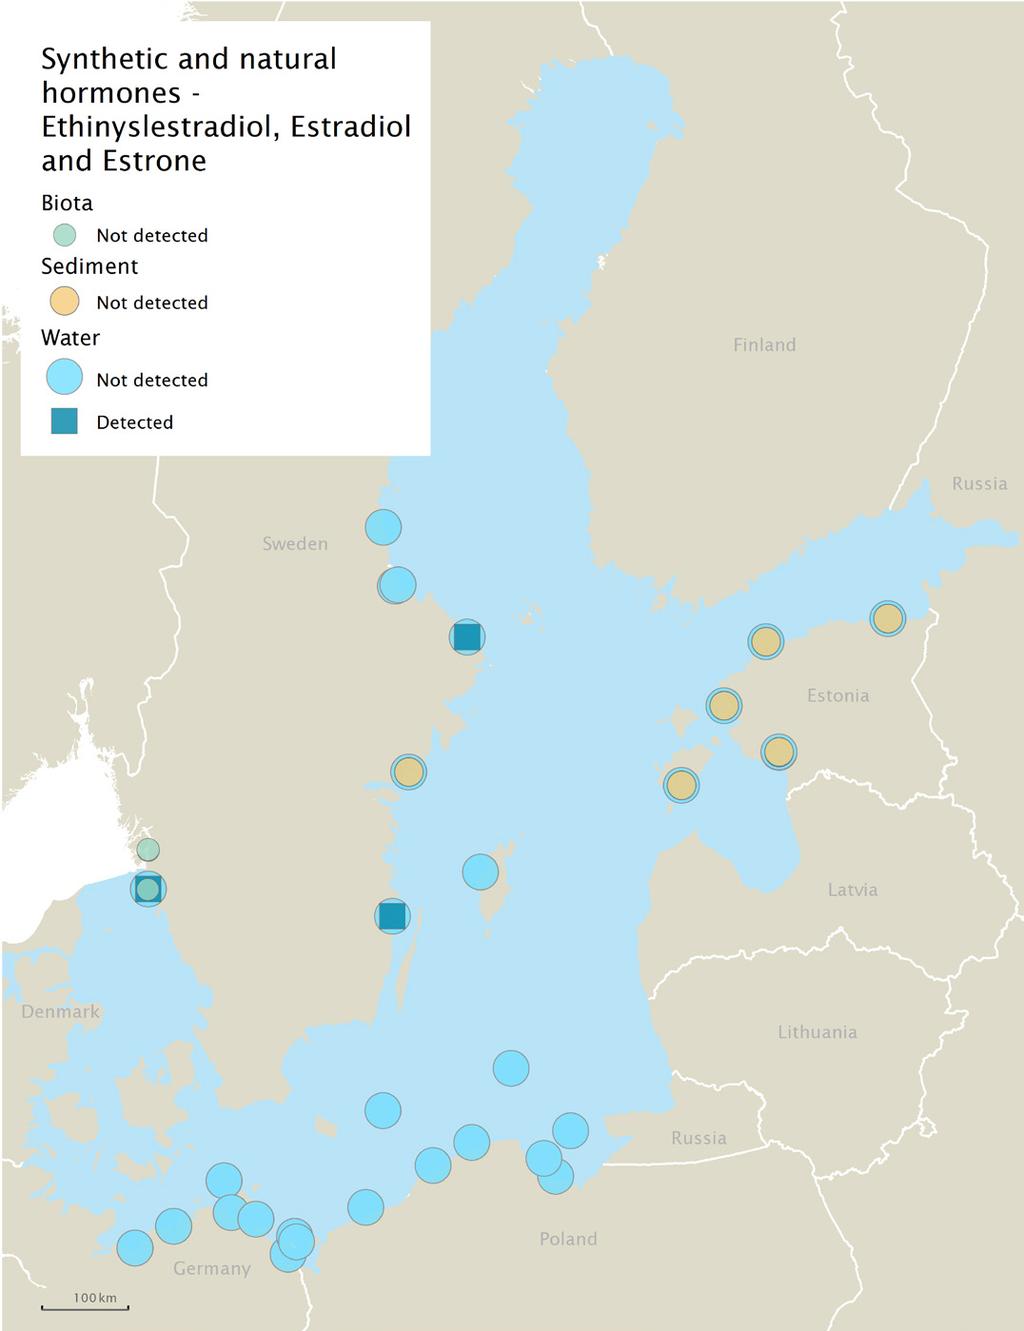 EMERGING POLLUTANTS IN WATER SERIES Pharmaceuticals in the aquatic environment of the Baltic Sea region Figure A4.